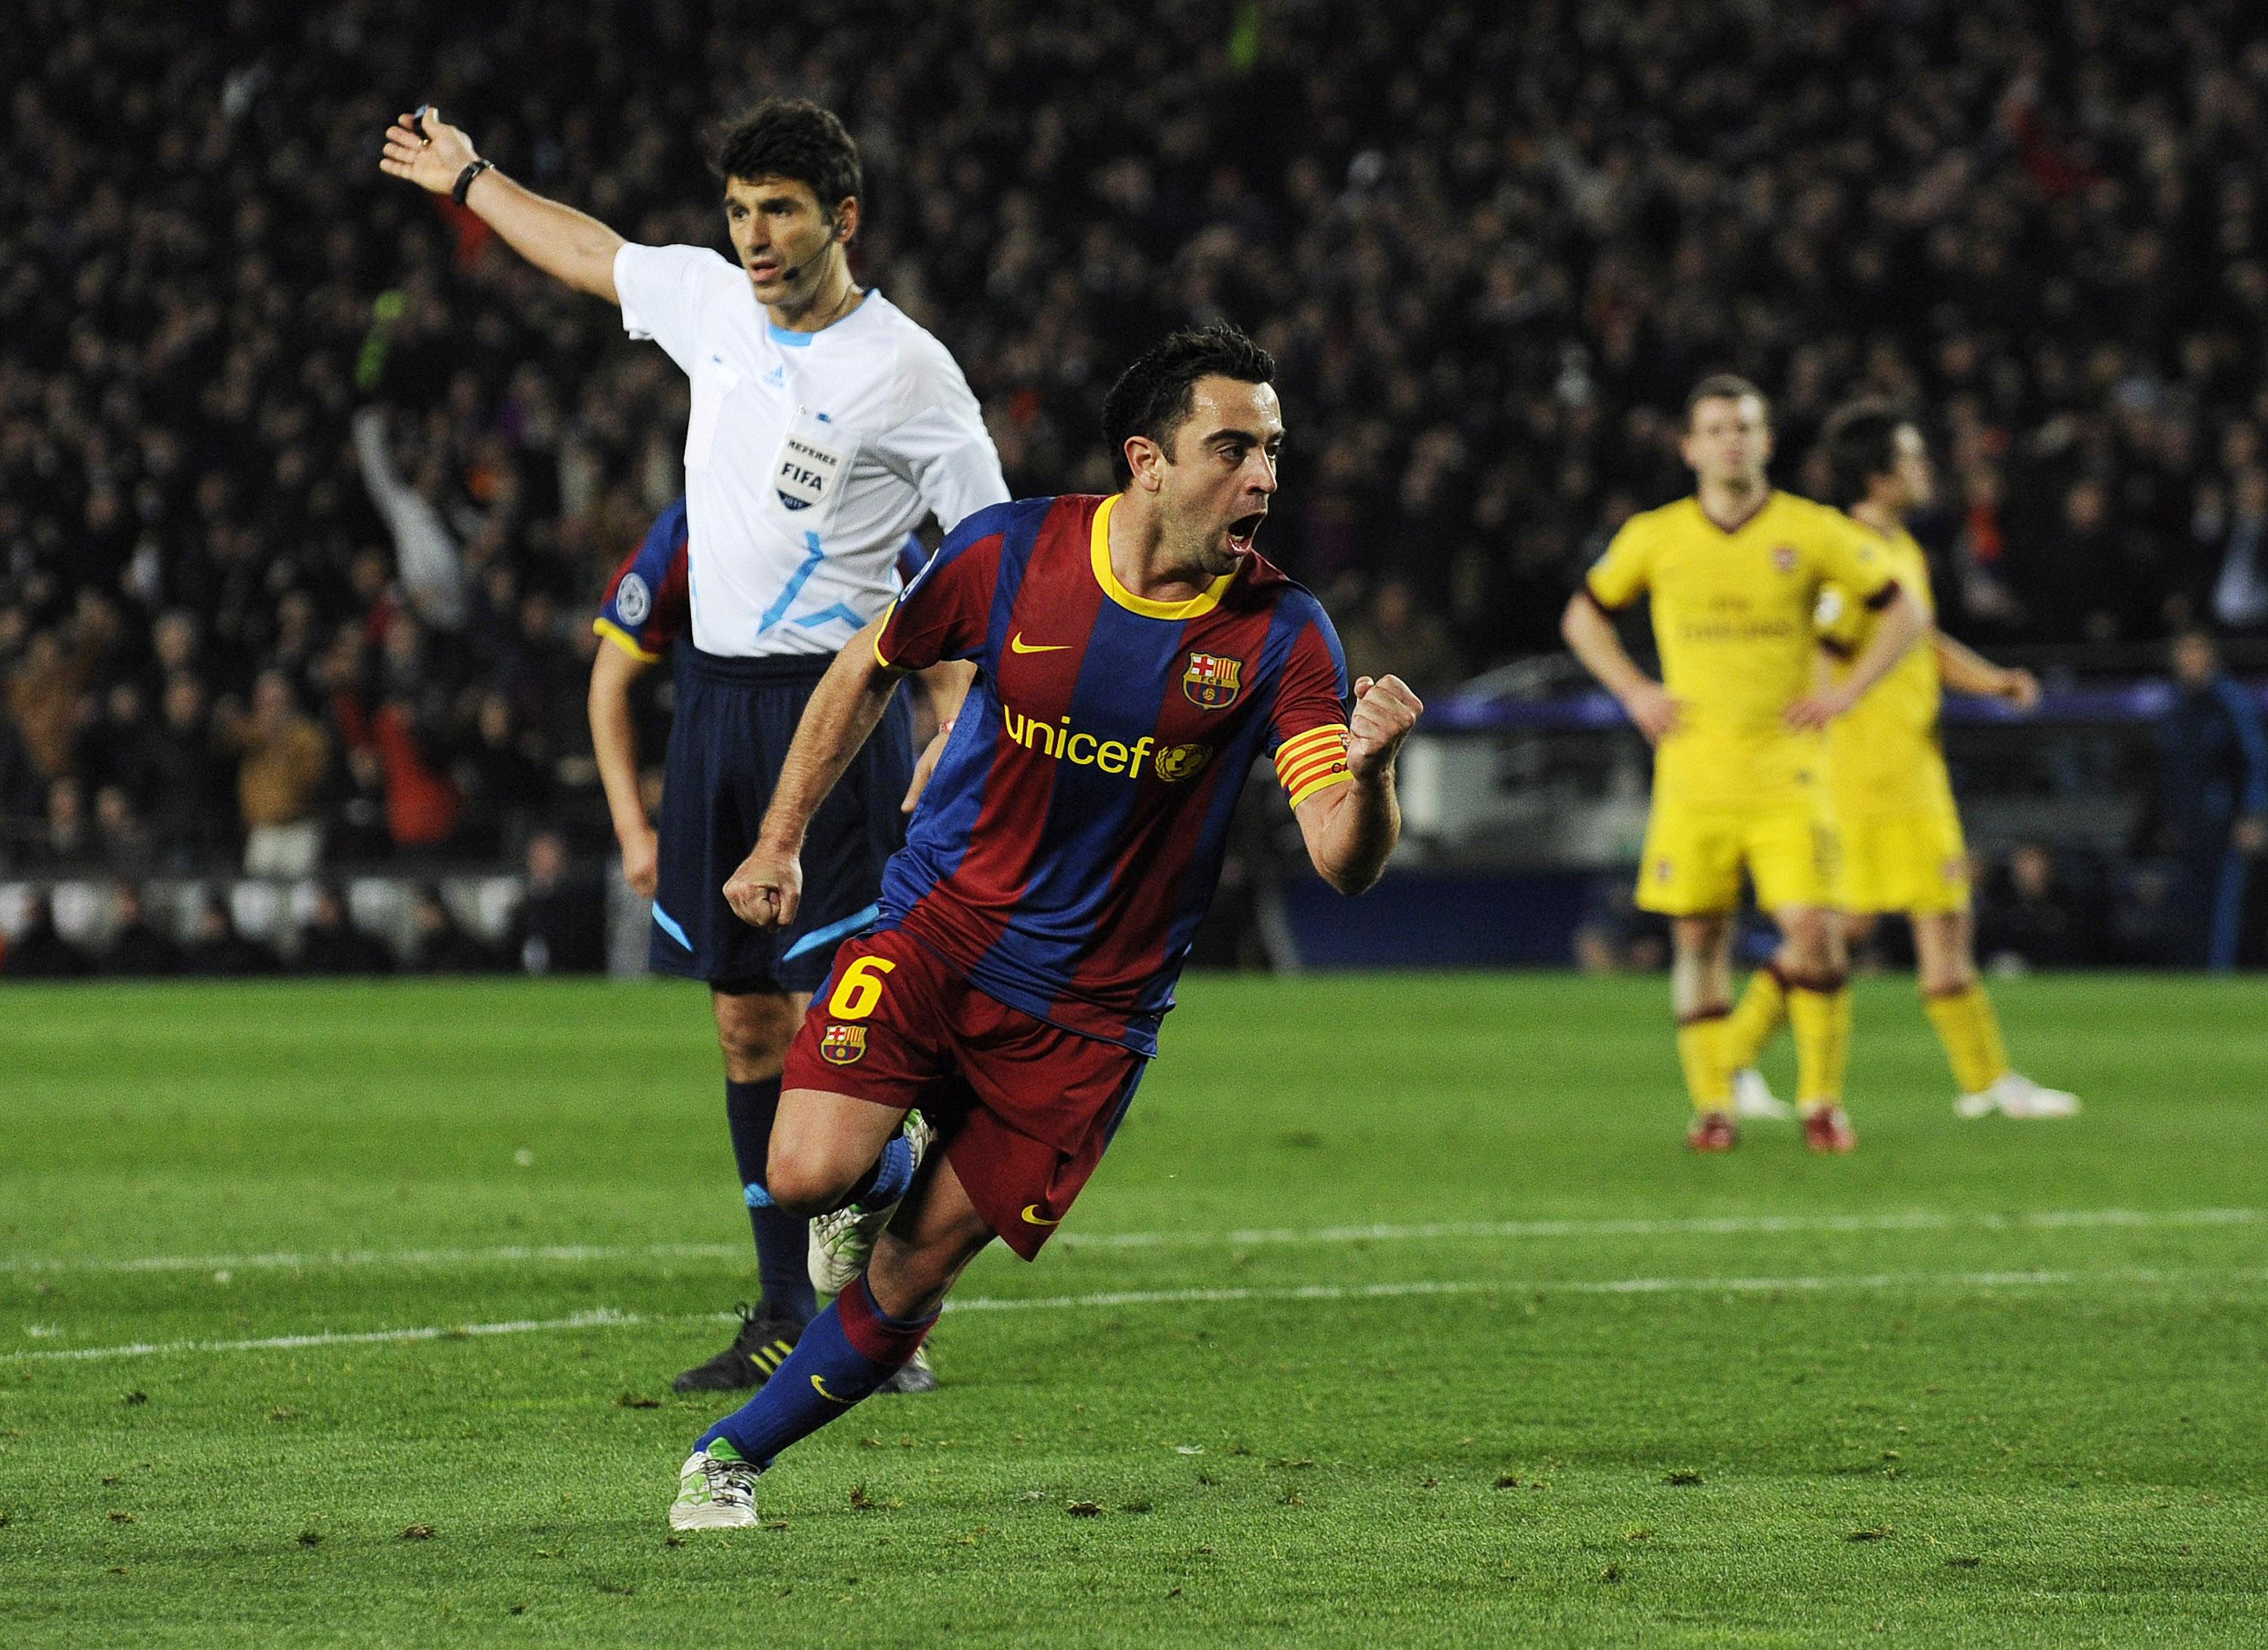 BARCELONA, SPAIN - MARCH 08:  Xavi Hernandez of FC Barcelona (C) celebrates after scoring his team's second goal during the UEFA Champions League round of 16 second leg match between Barcelona and Arsenal at the Camp Nou stadium on March 8, 2011 in Barcel